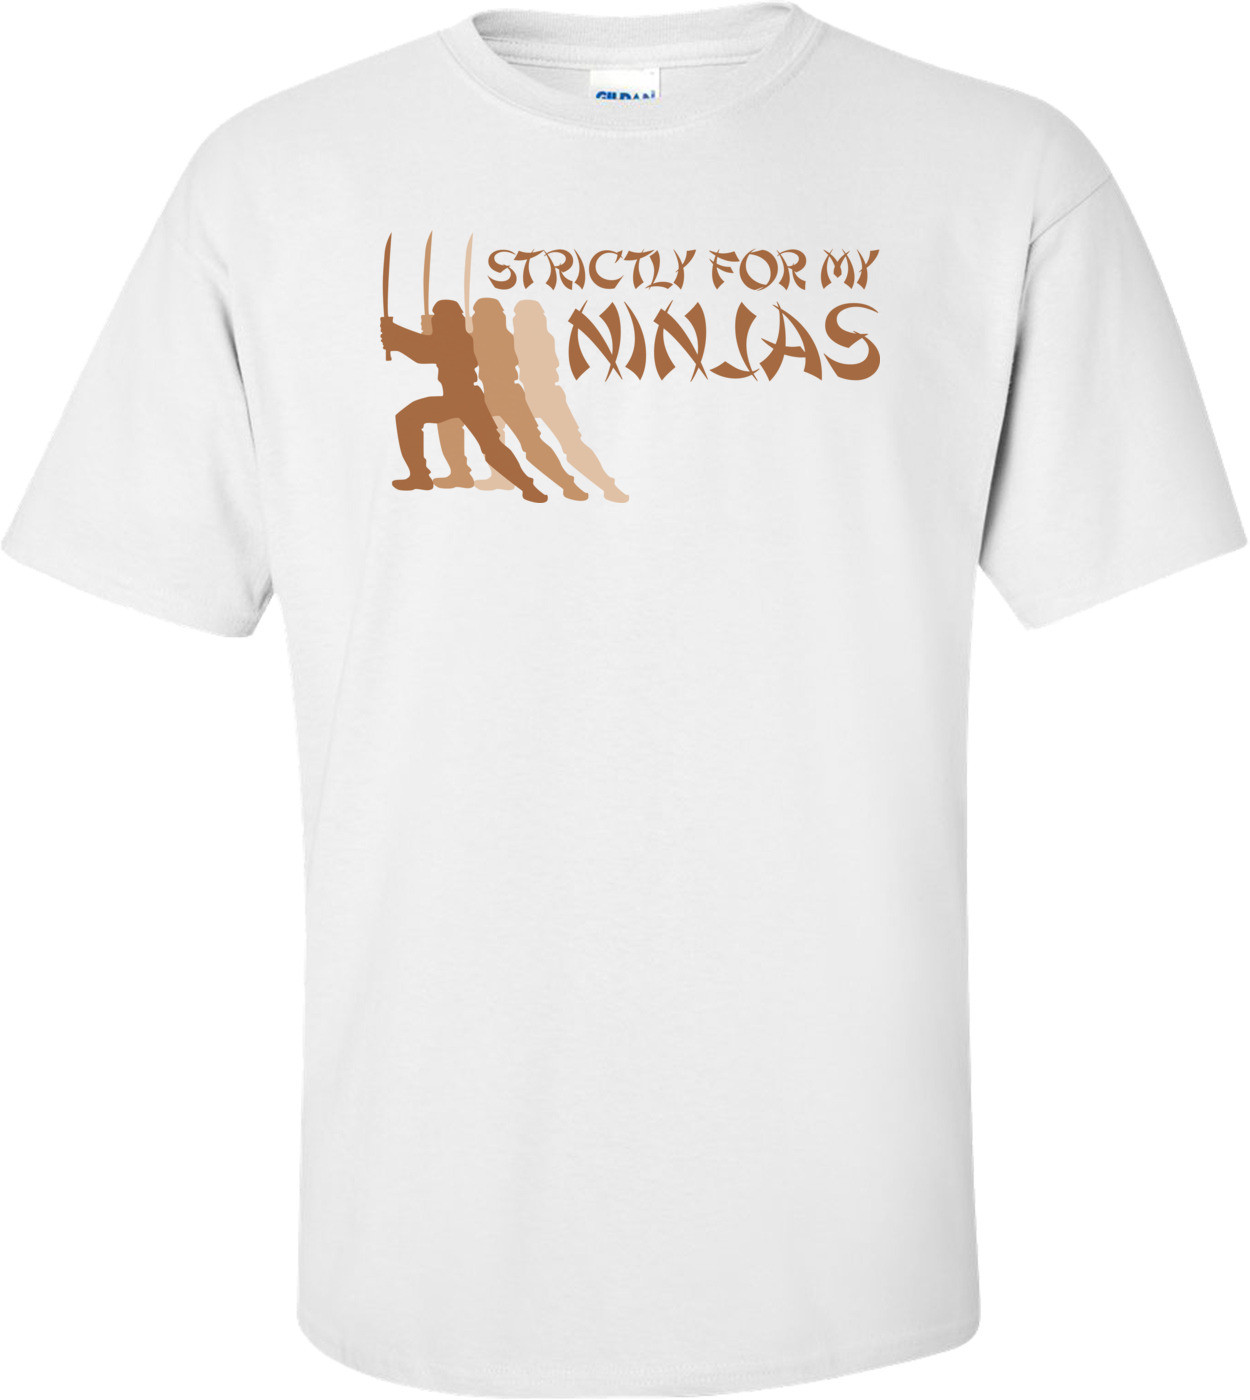 Strictly For My Ninjas T-shirt